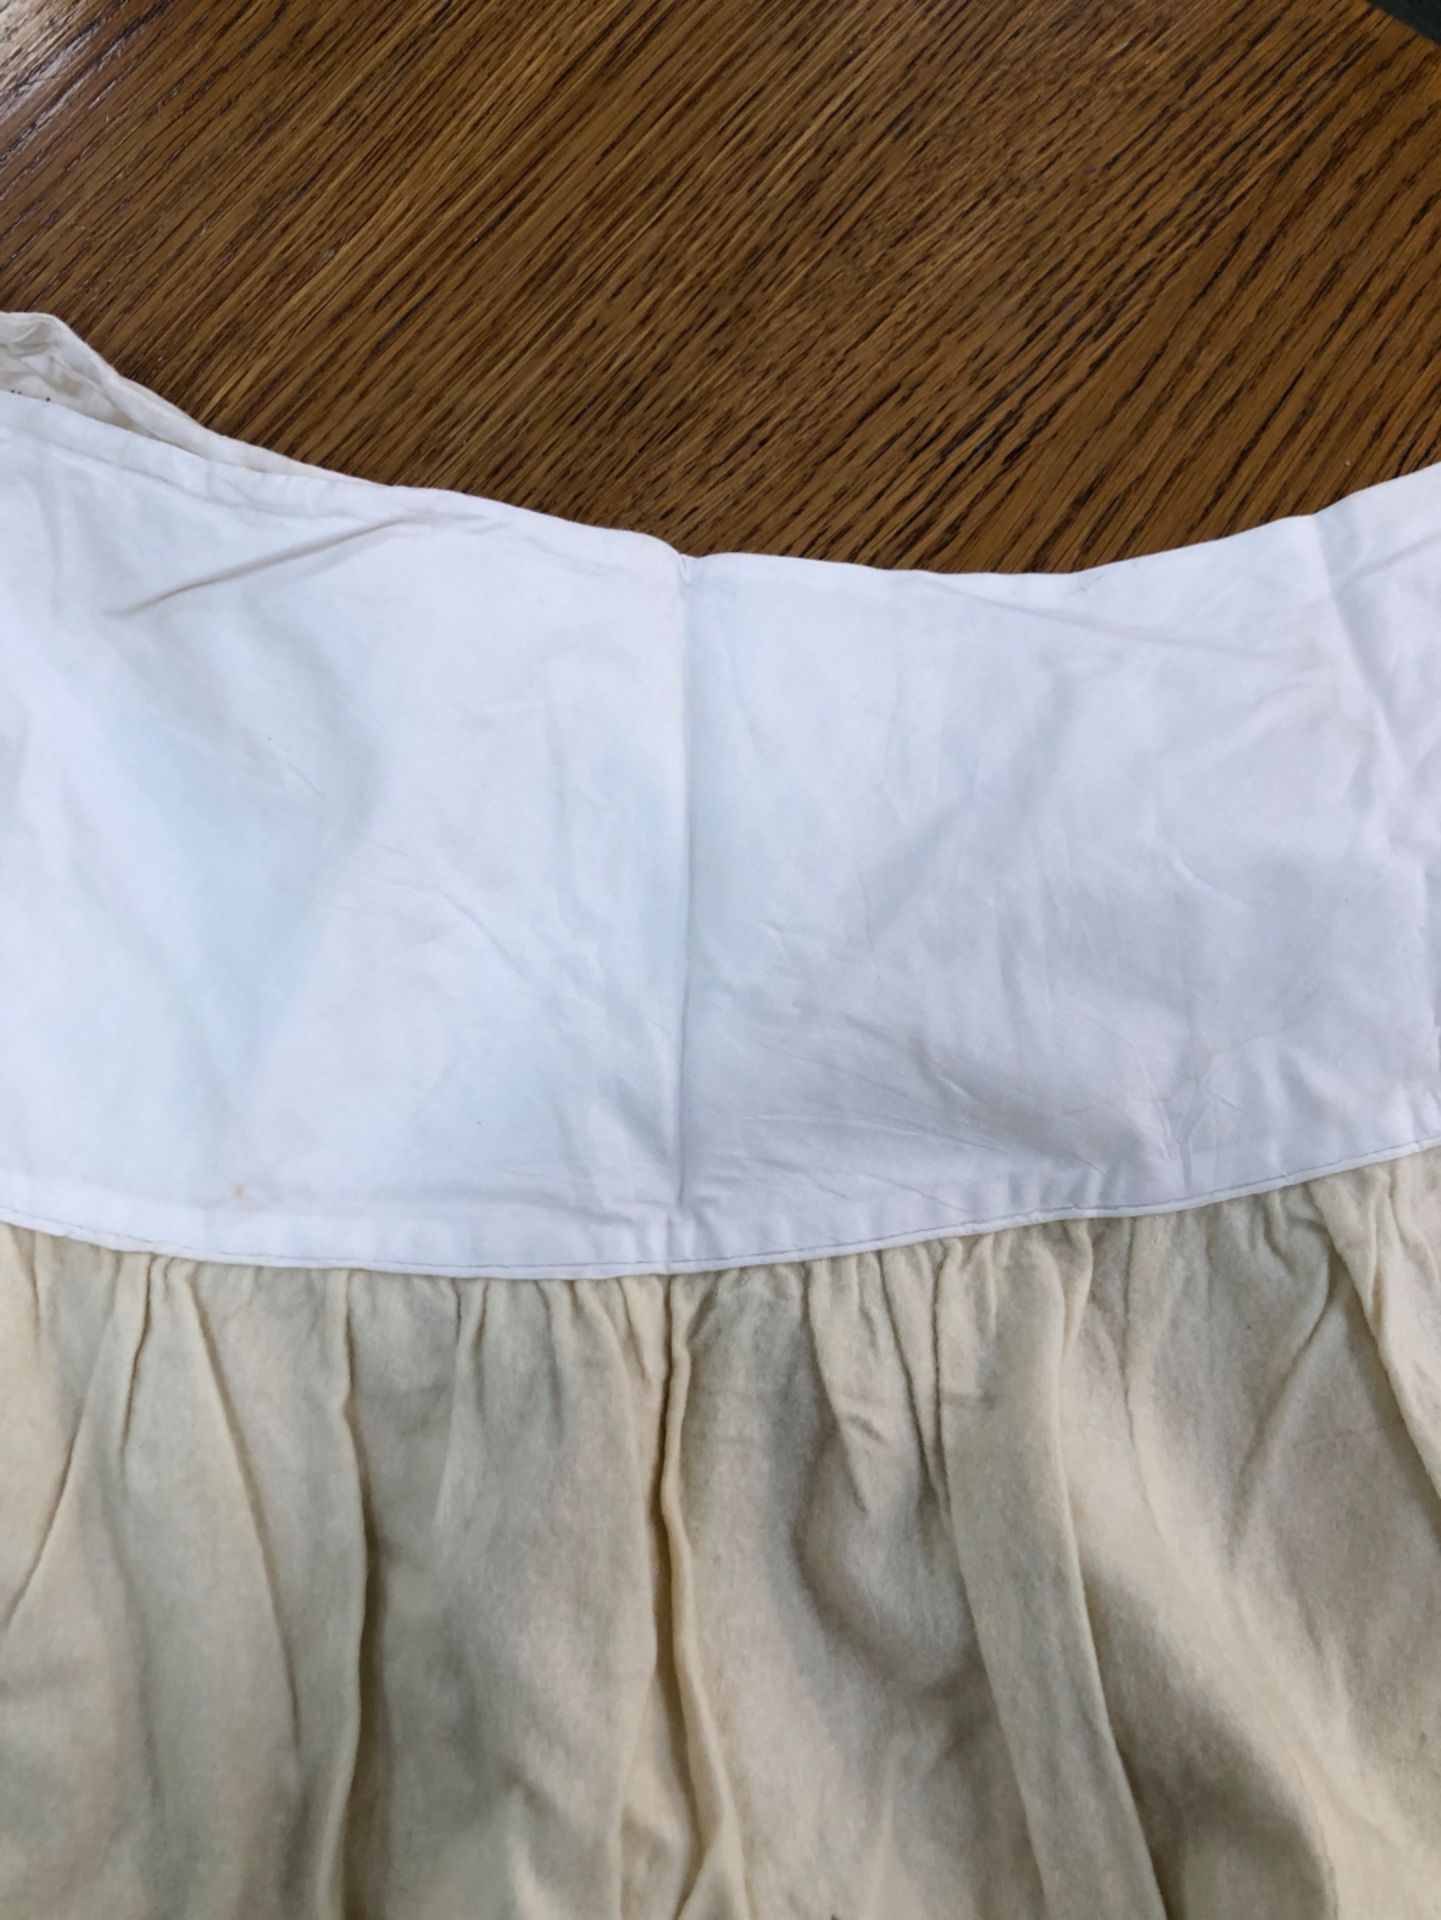 A HEAVY EASTERN LADIES SKIRT AND A SIMILAR DESIGNED CHILDS EXAMPLE, AN EARLY UNDERSKIRT WITH - Image 18 of 20